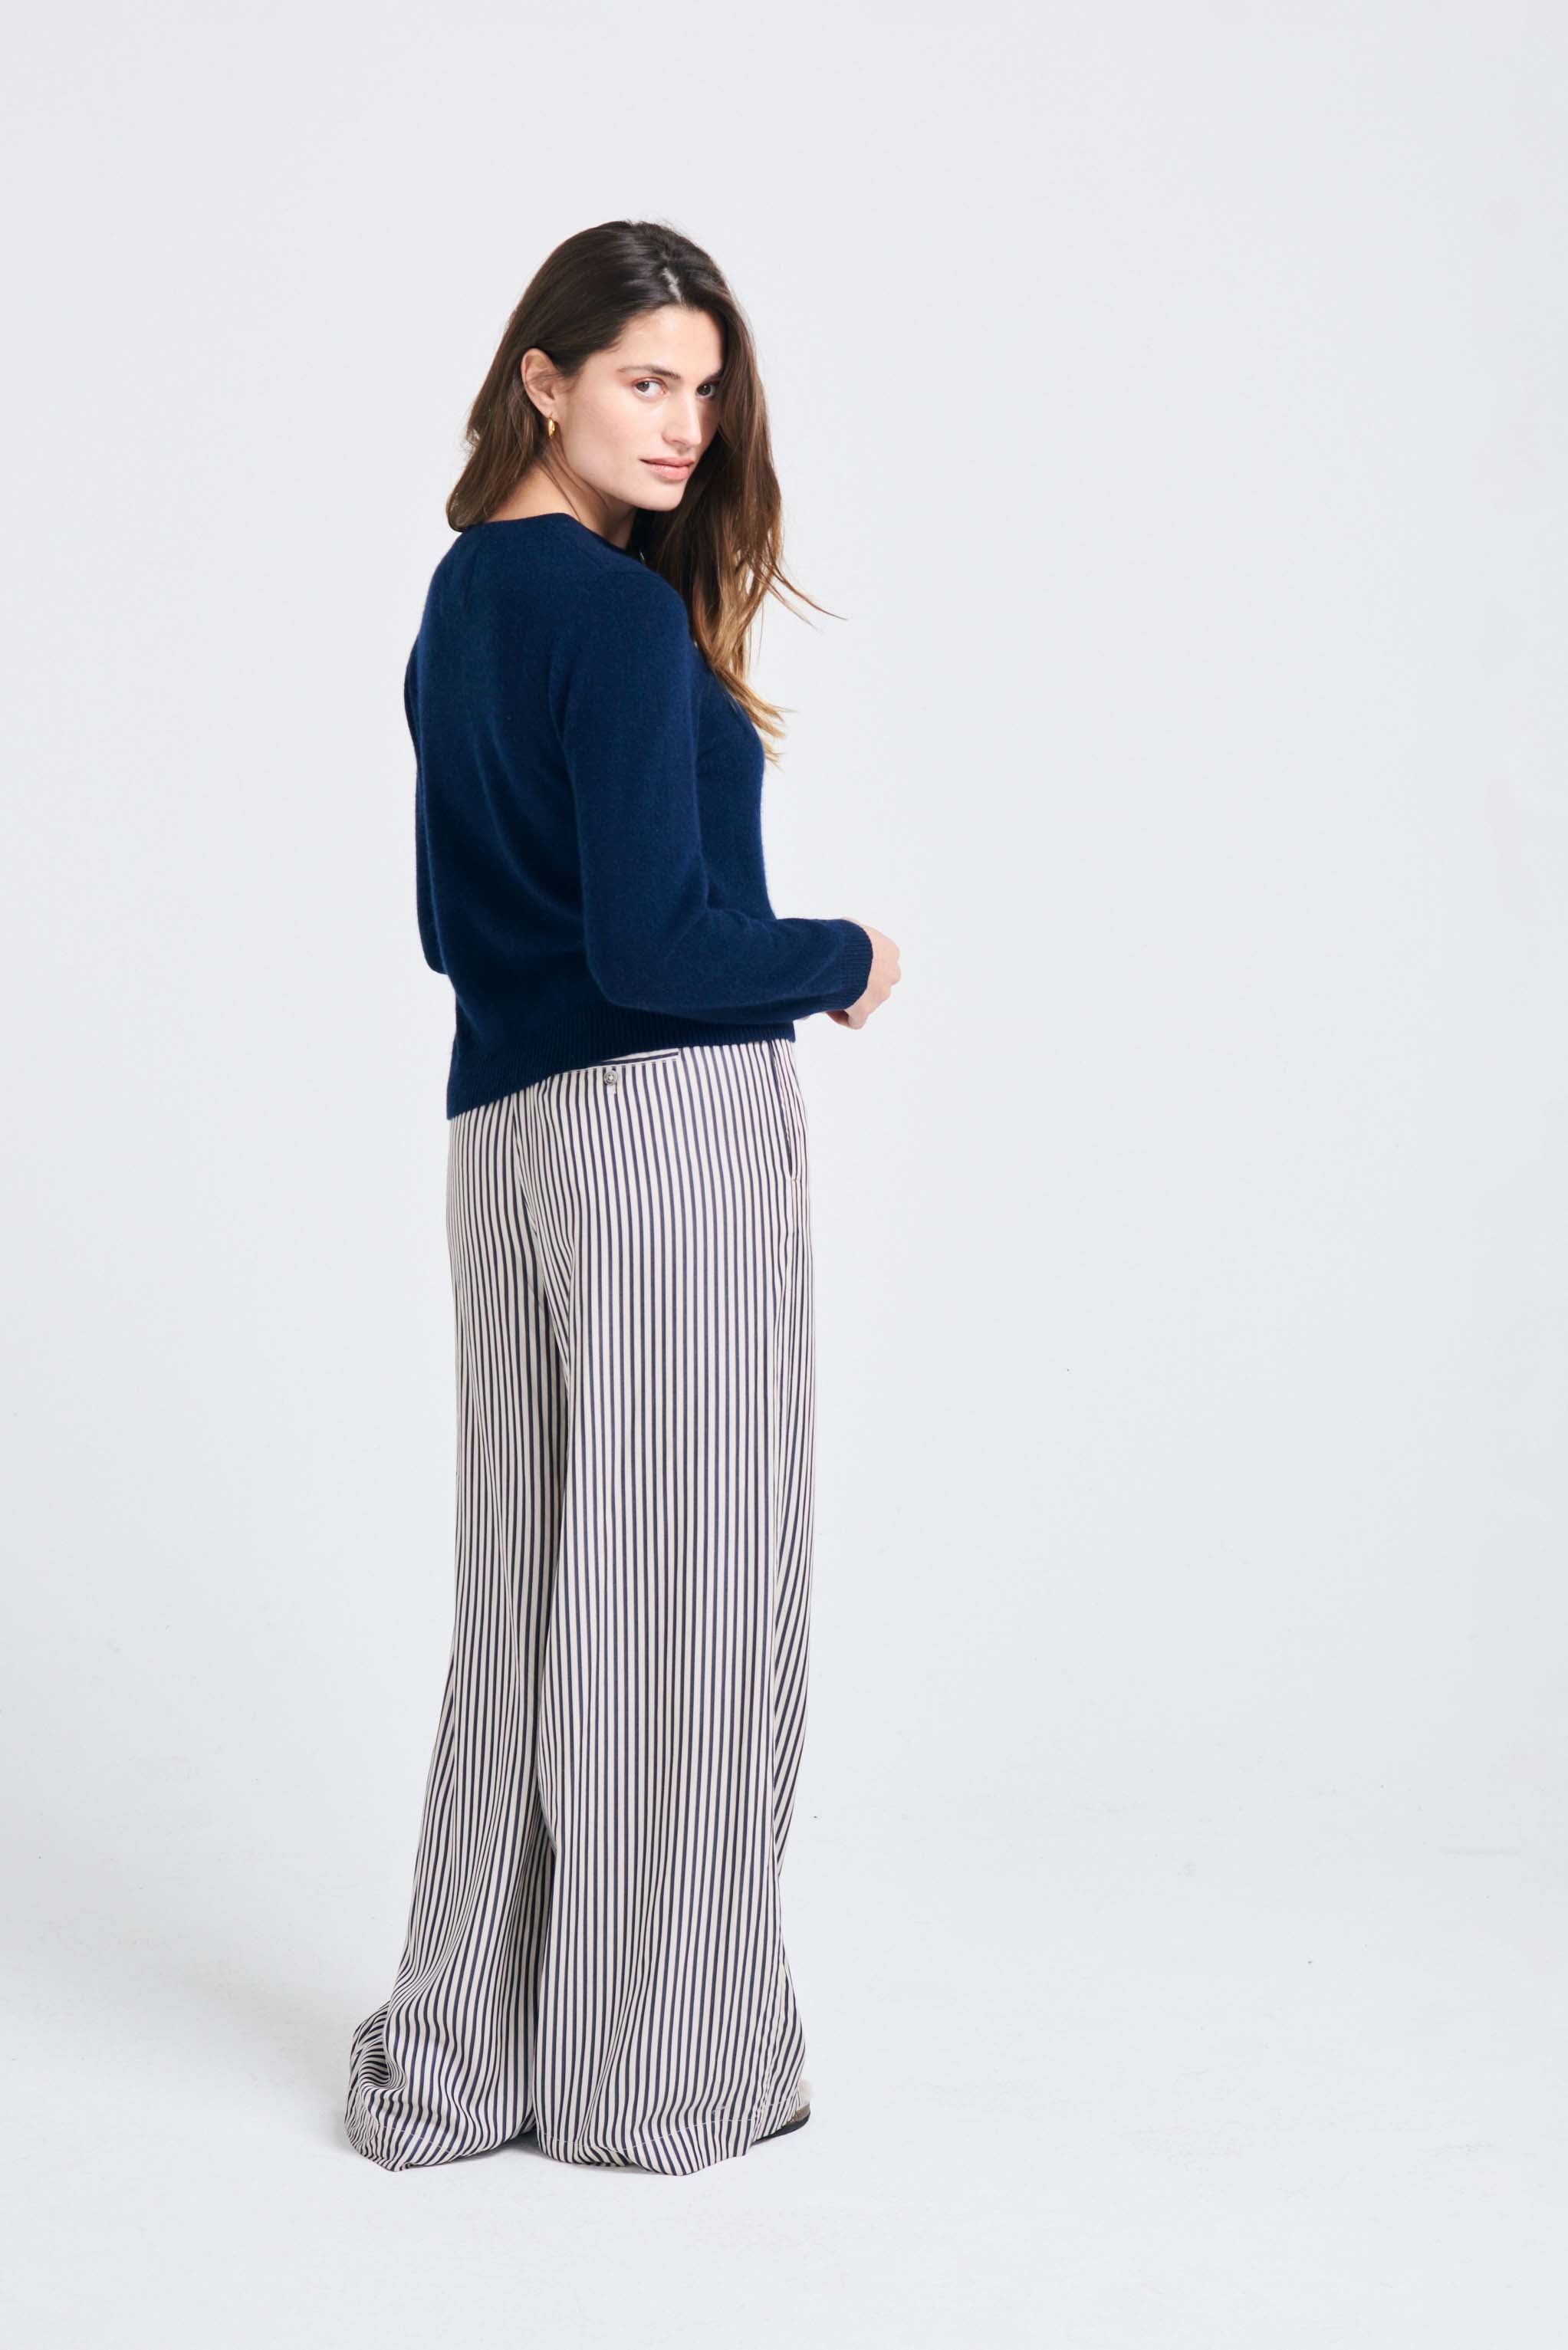 Brown haired female model wearing Jumper1234 Navy lighter weight crew neck cashmere jumper facing away from the camera